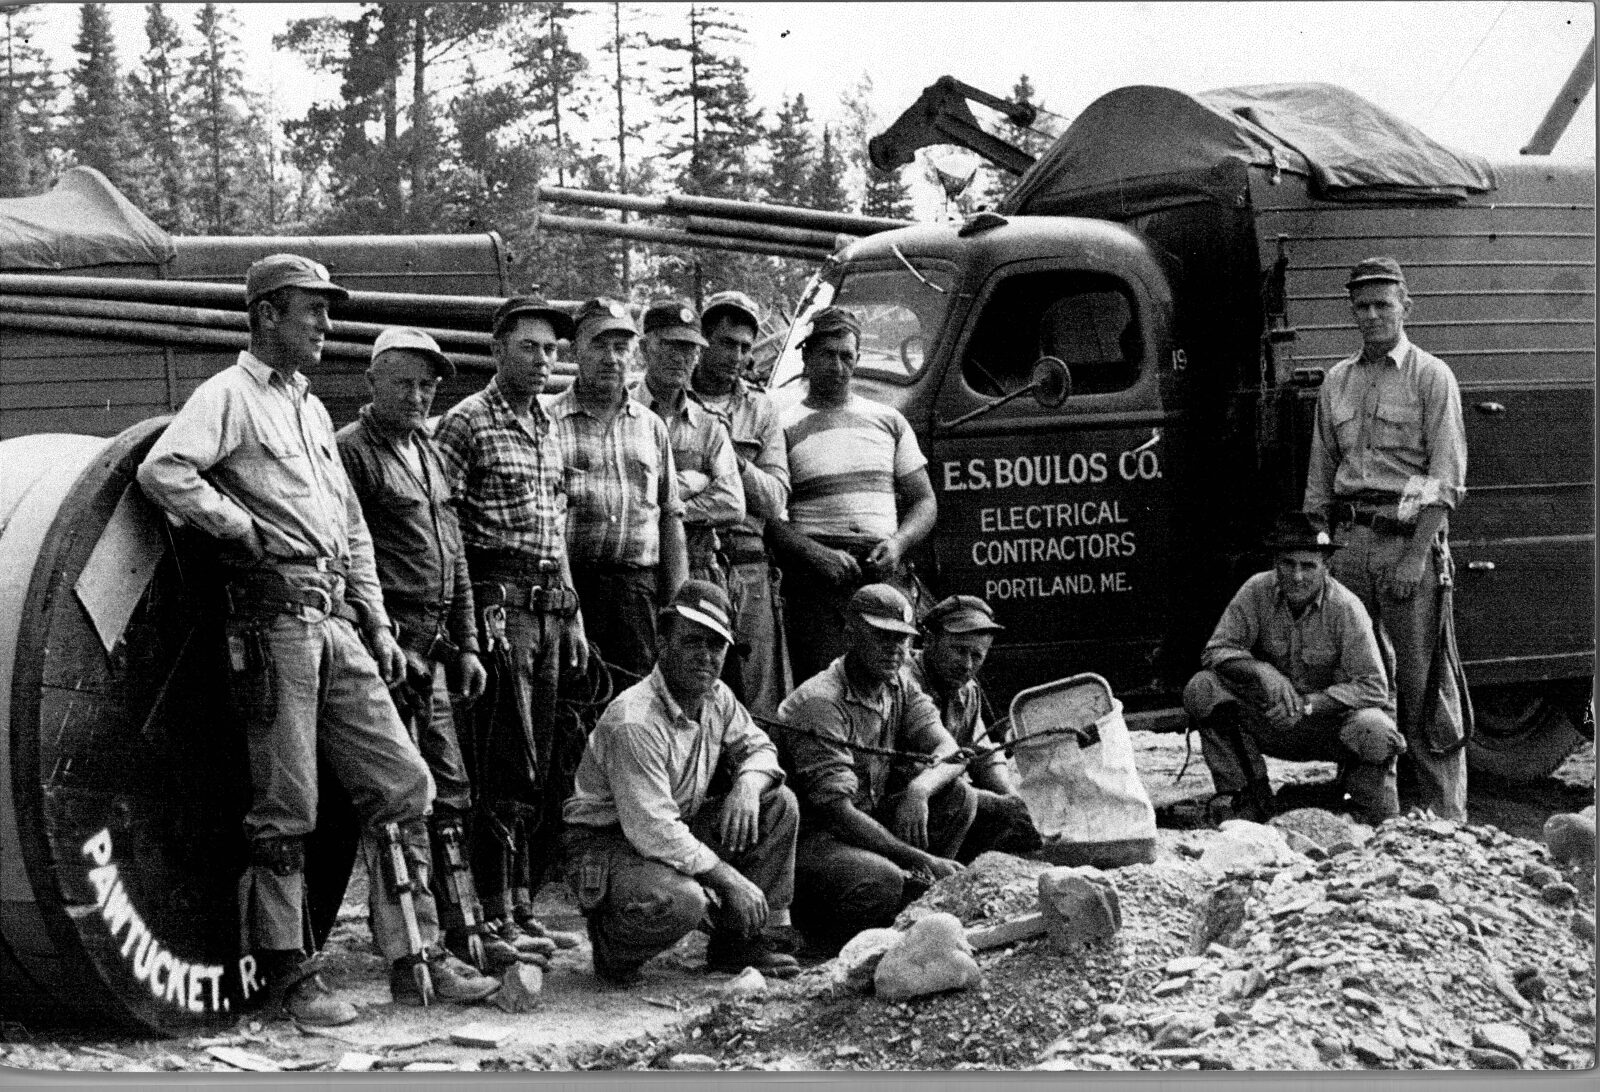 Group of workers in front of a E.S. Boulos Co. truck